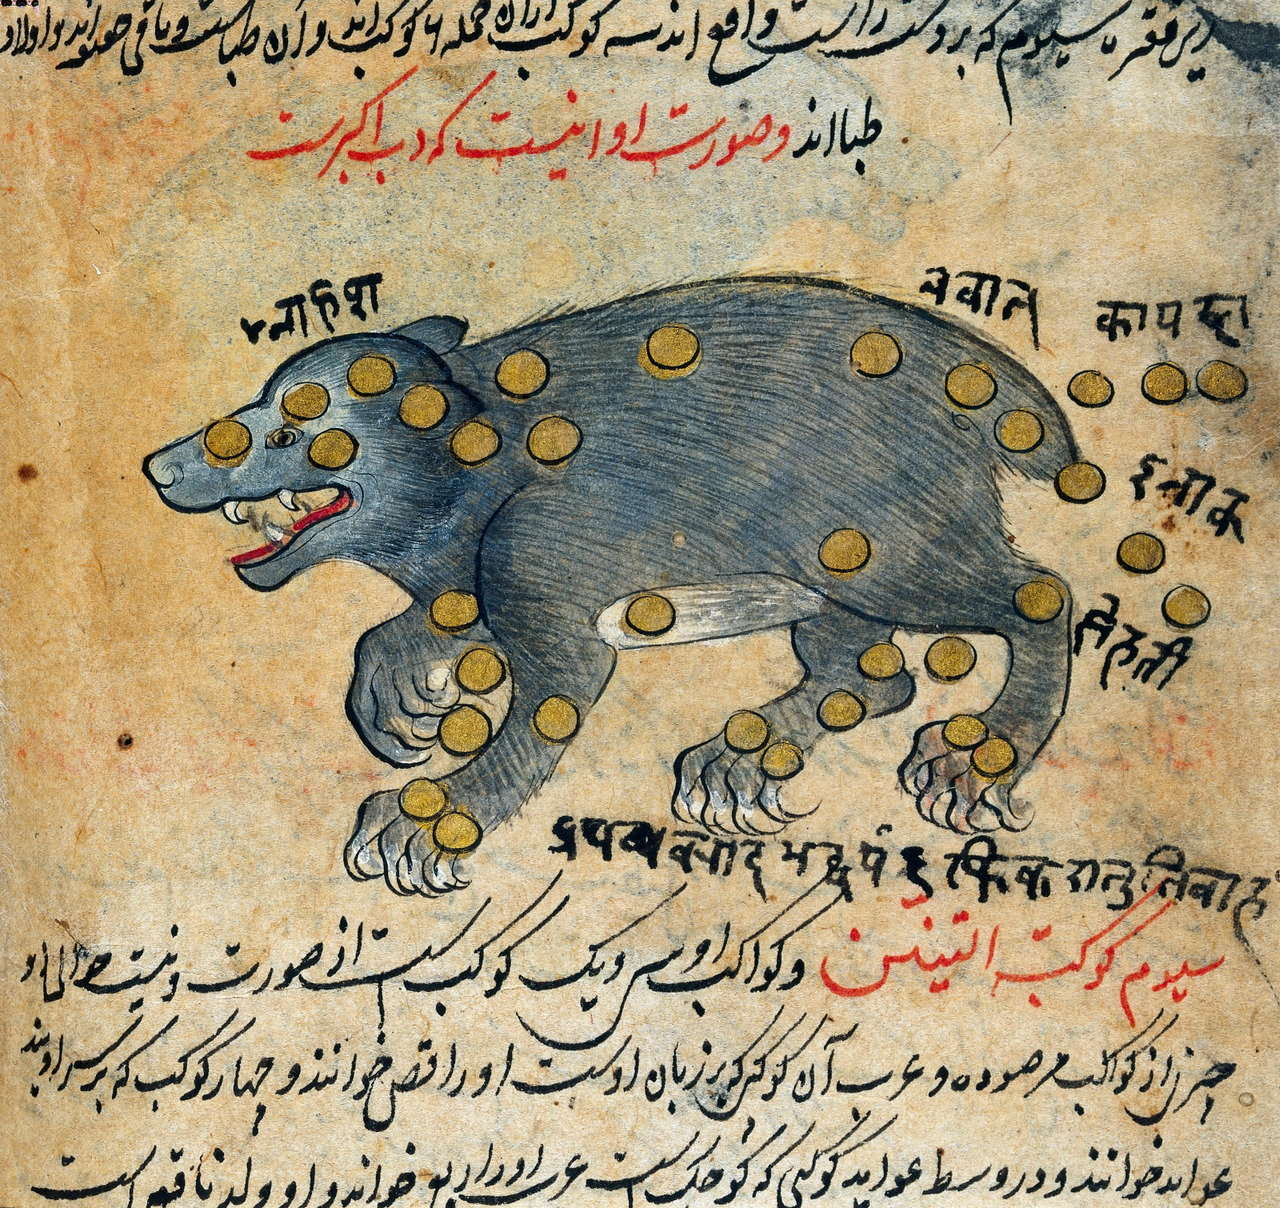 signorformica:
â€œ Constellation of Ursa Major. Calendar of the year A.H. 1301, according to the Persian solar system. Wellcome Library. BibliothÃ¨que Infernale on FB
â€